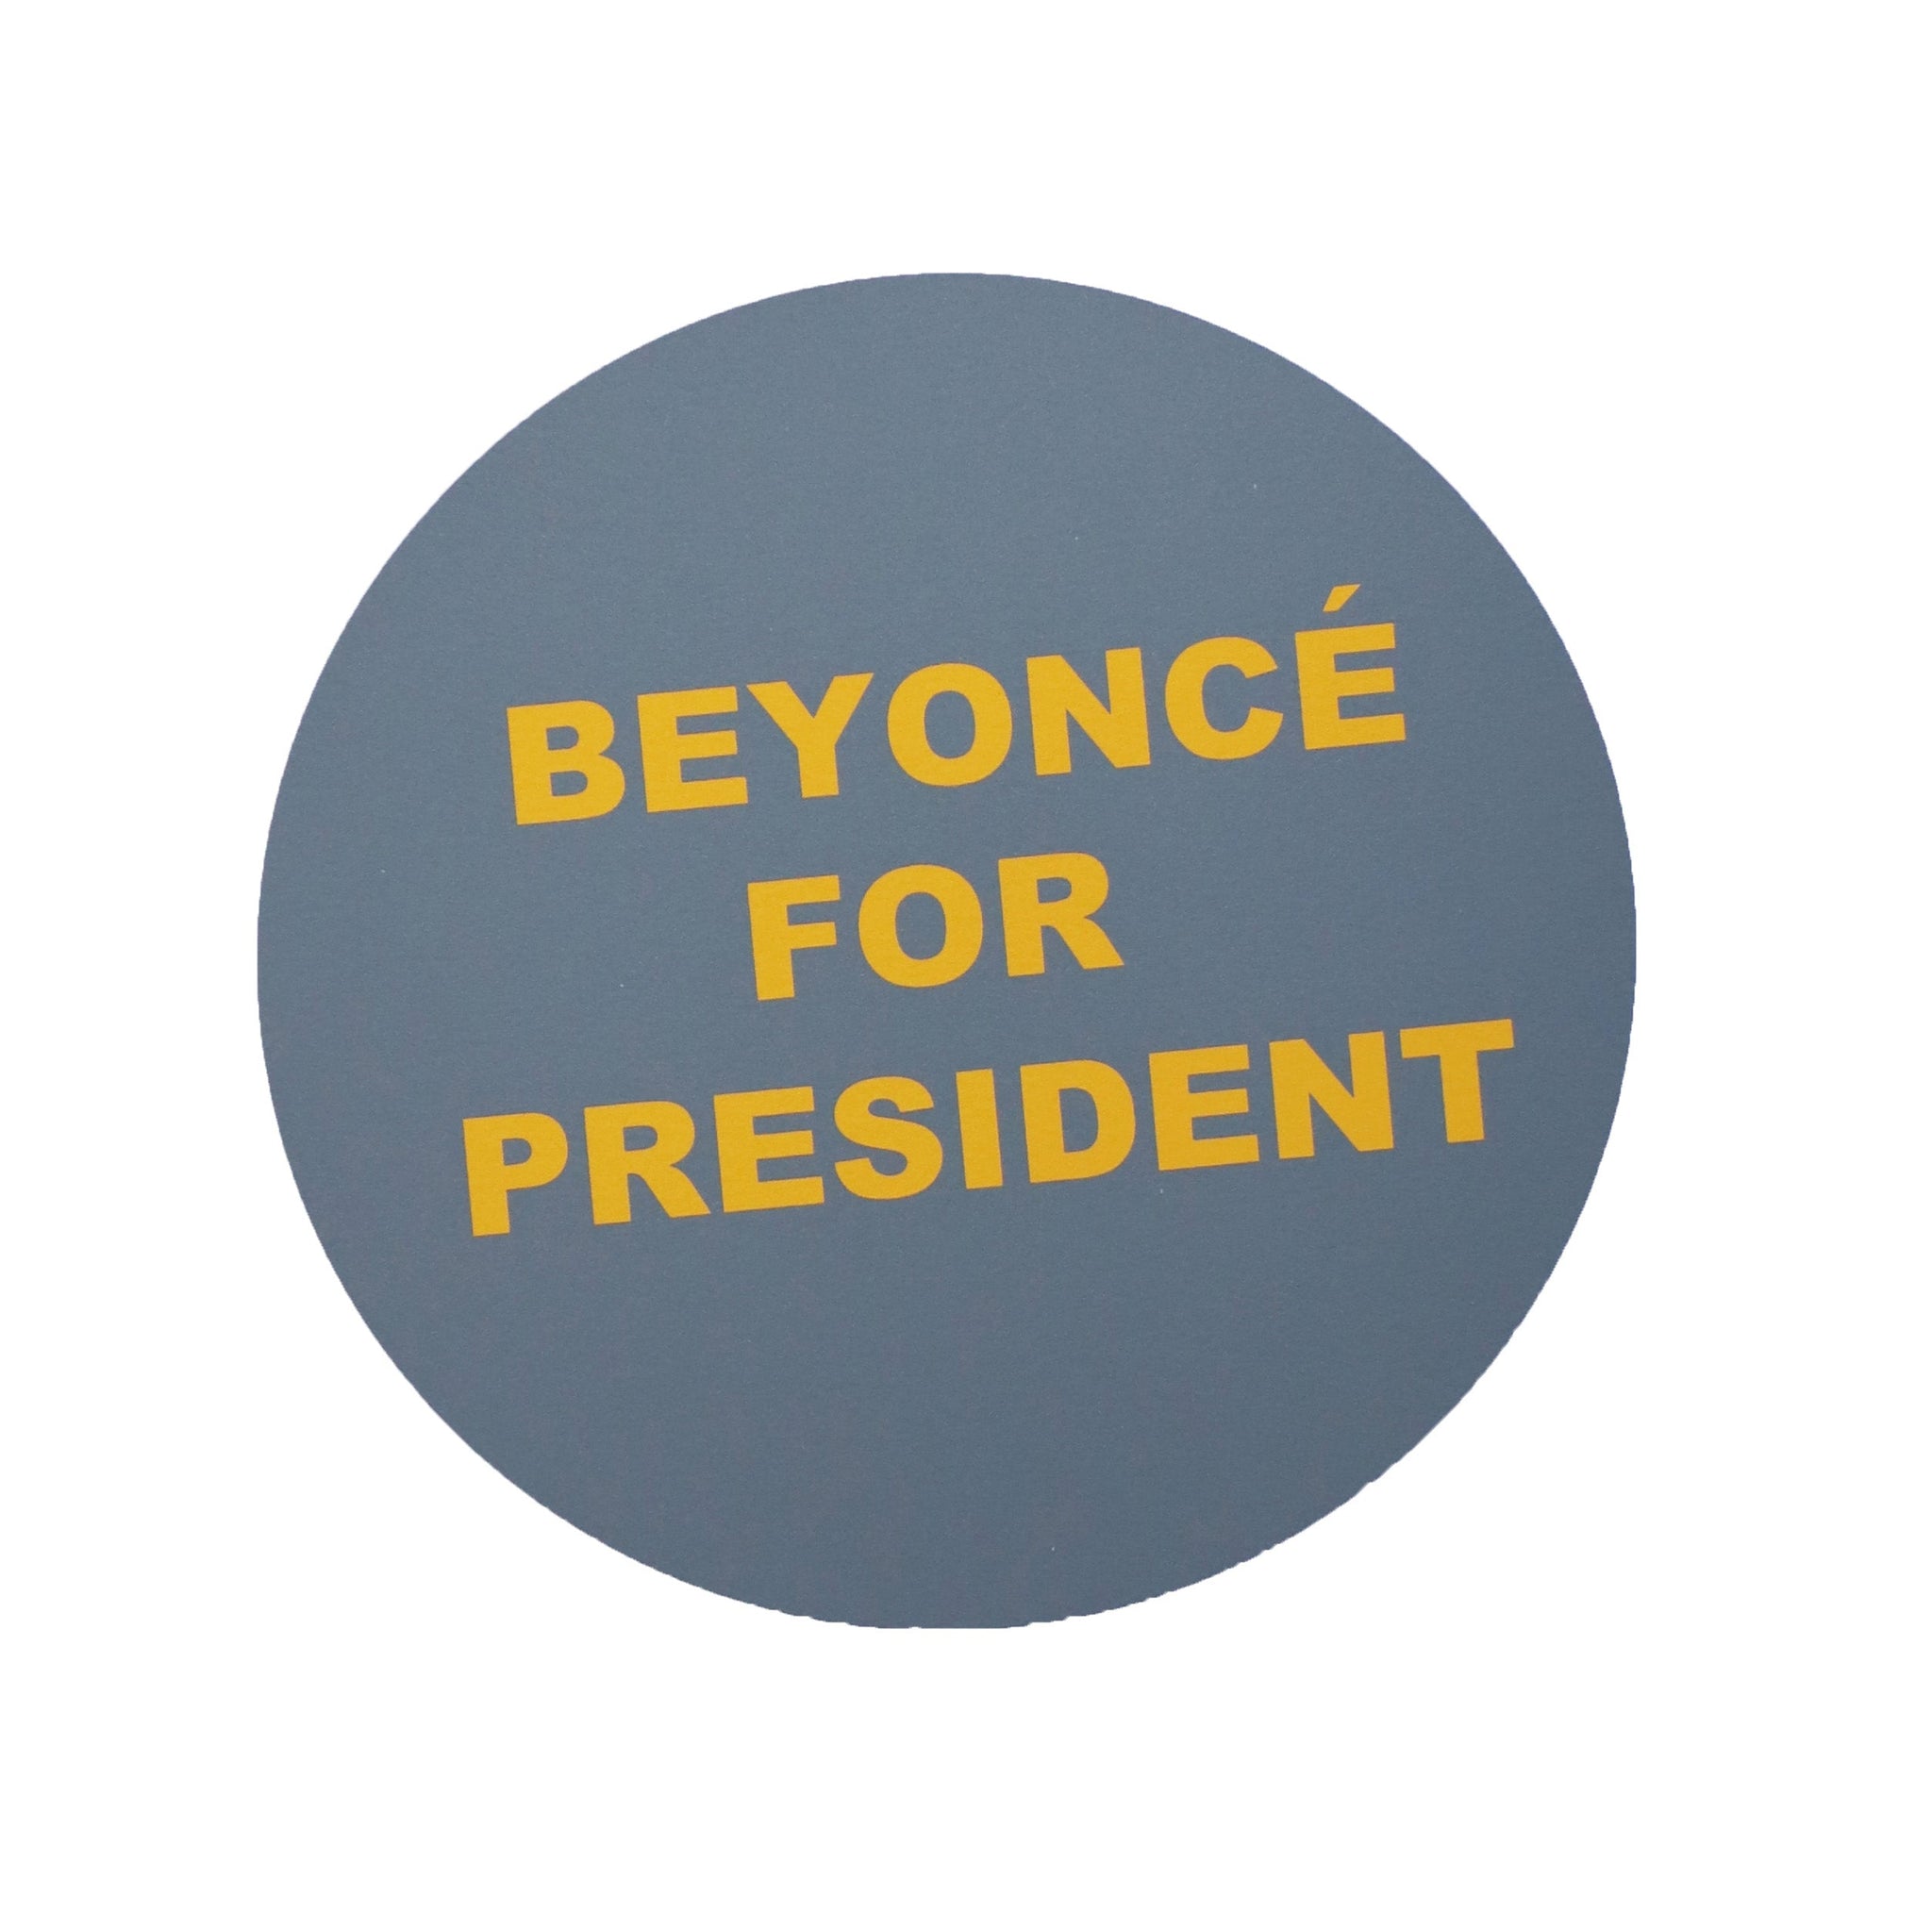 Beyonce for President